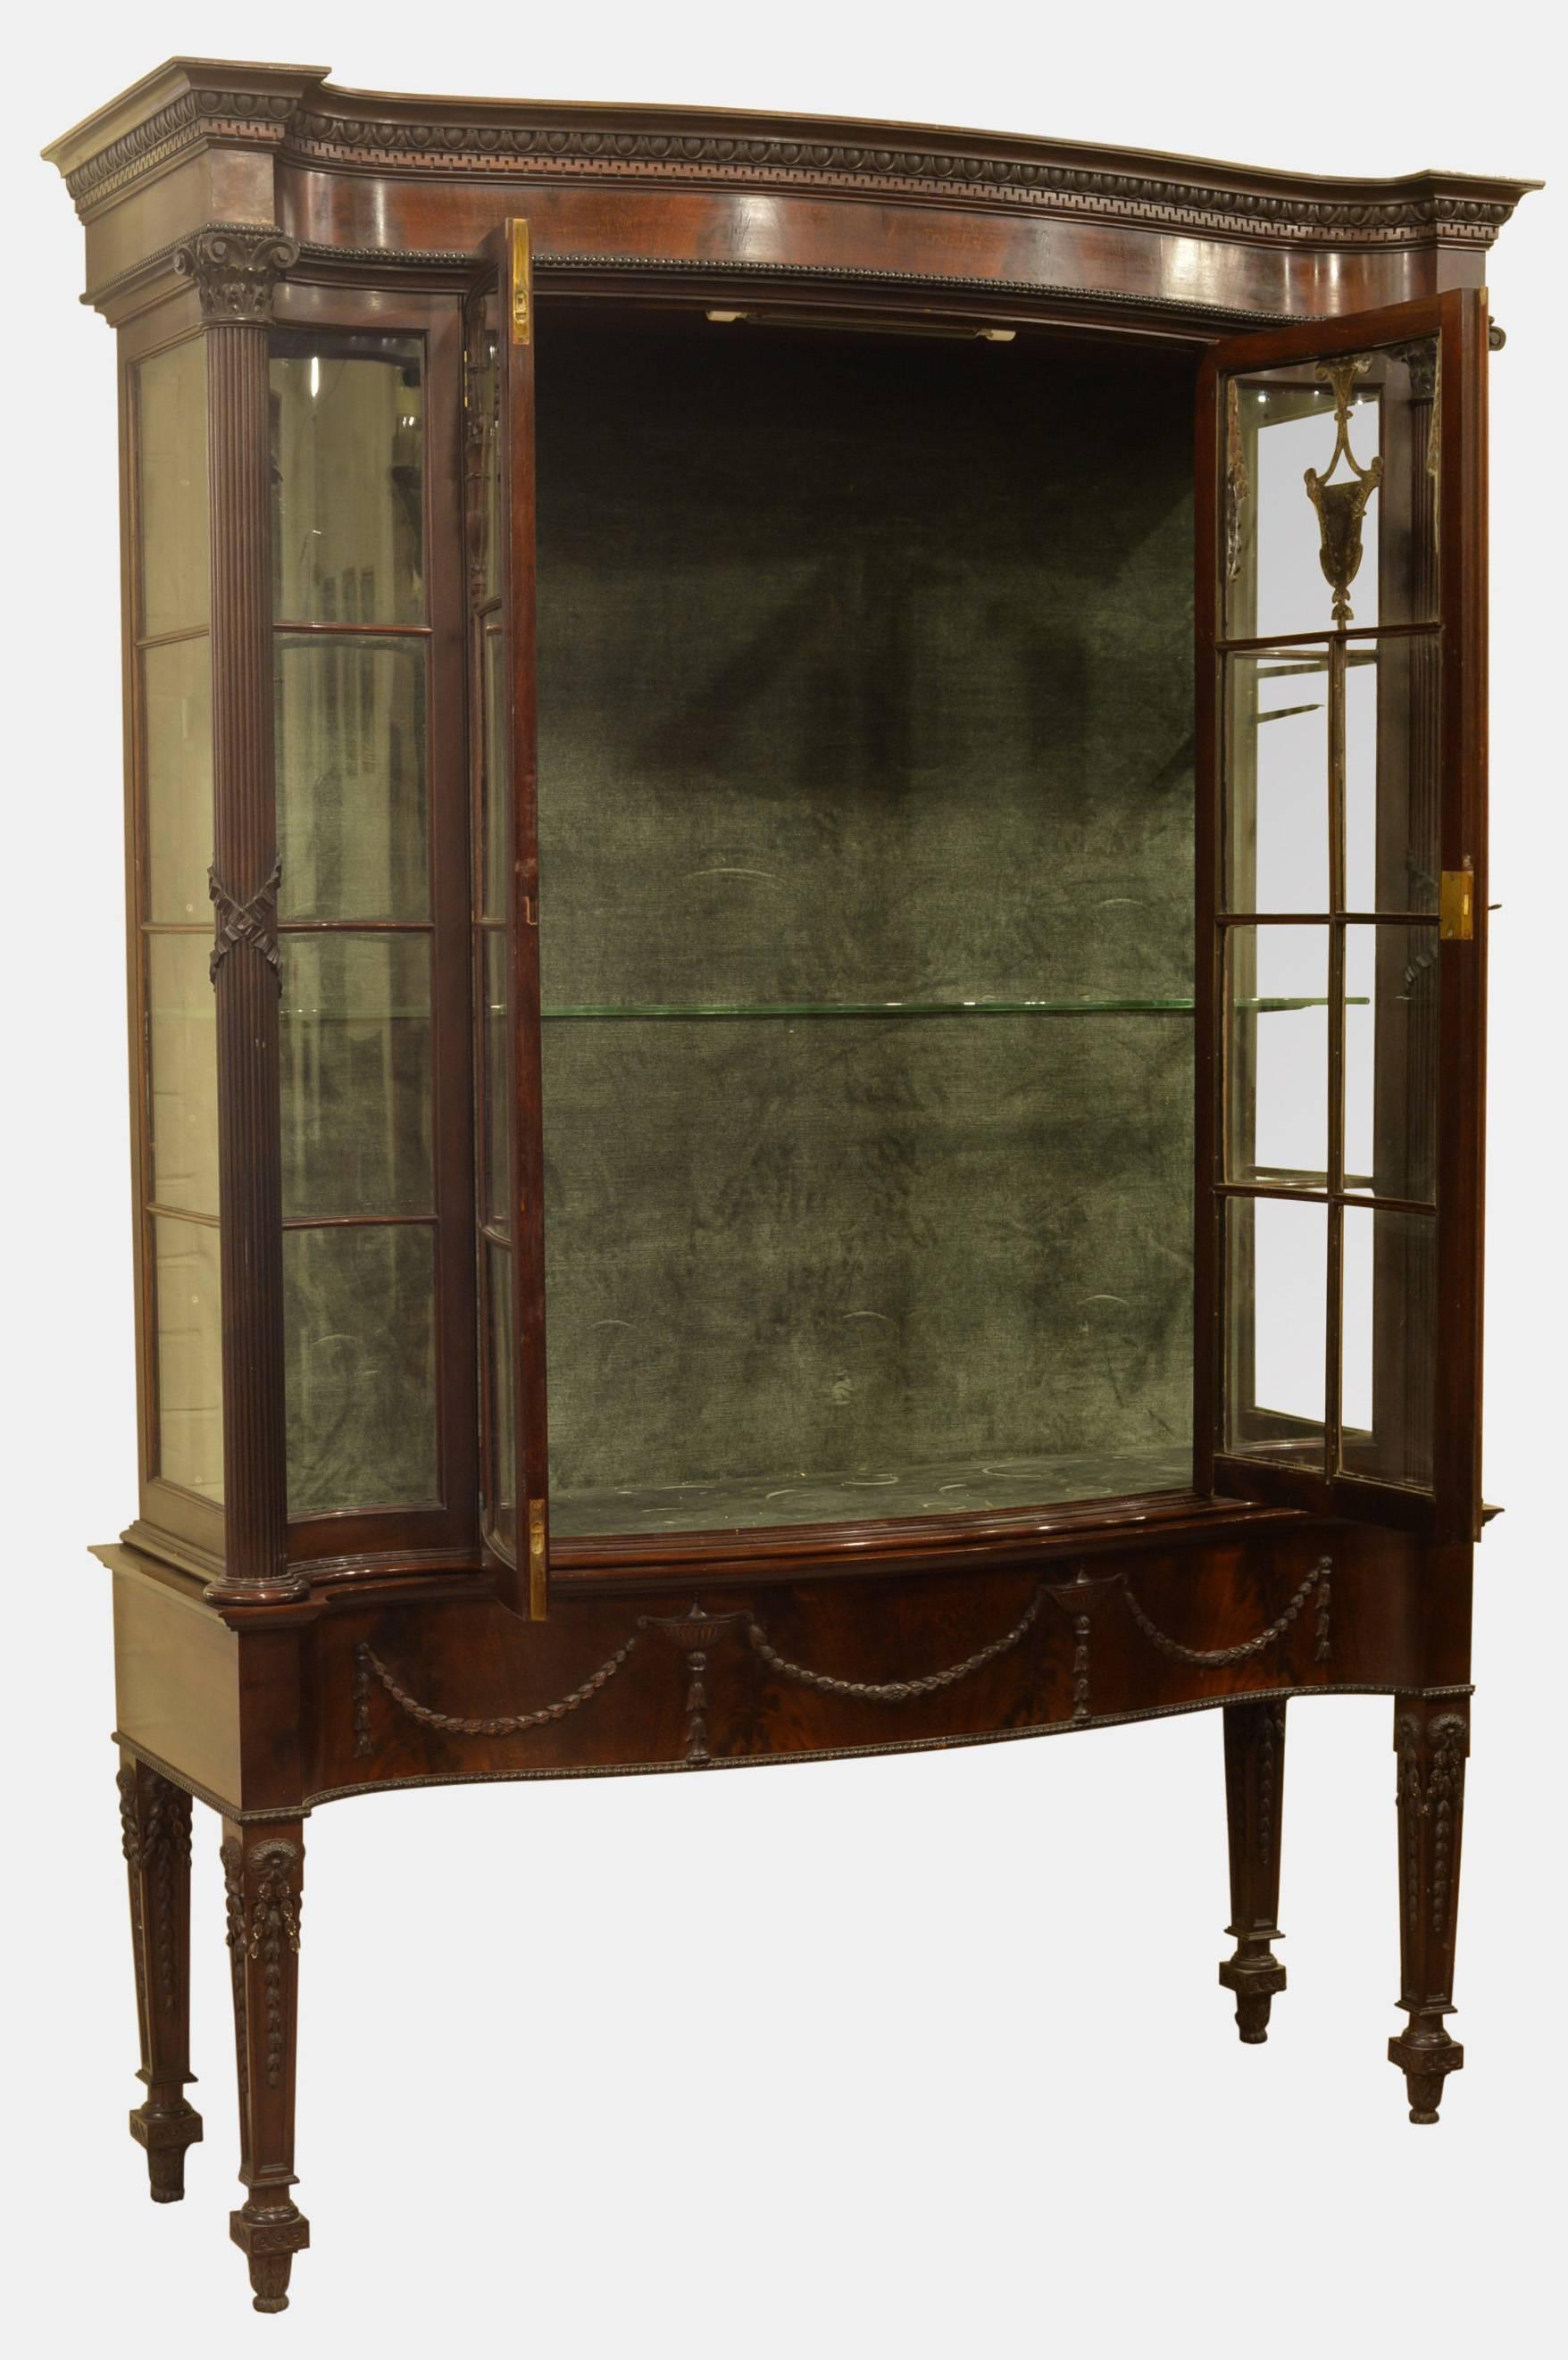 A fine mahogany serpentine fronted display cabinet with astragal glazed doors and ends decorated with classical urns and harebell swags.
The base unsuited standing on square tapering legs also decorated with harebell swags. the cornice with egg and